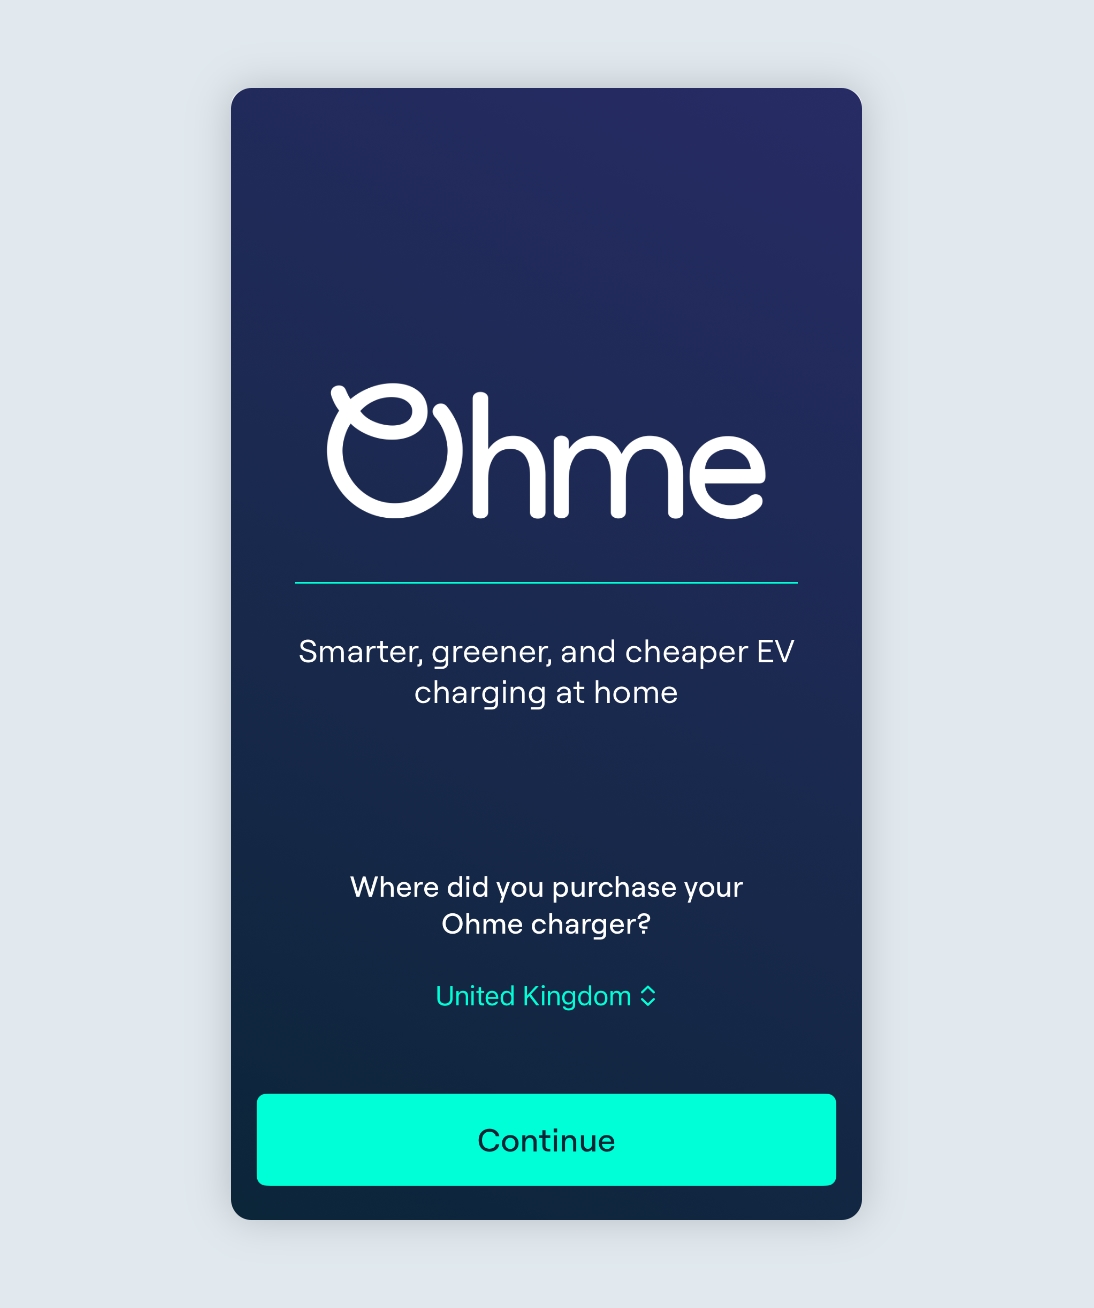 Start page of the Ohme app asking to select the country of purchase